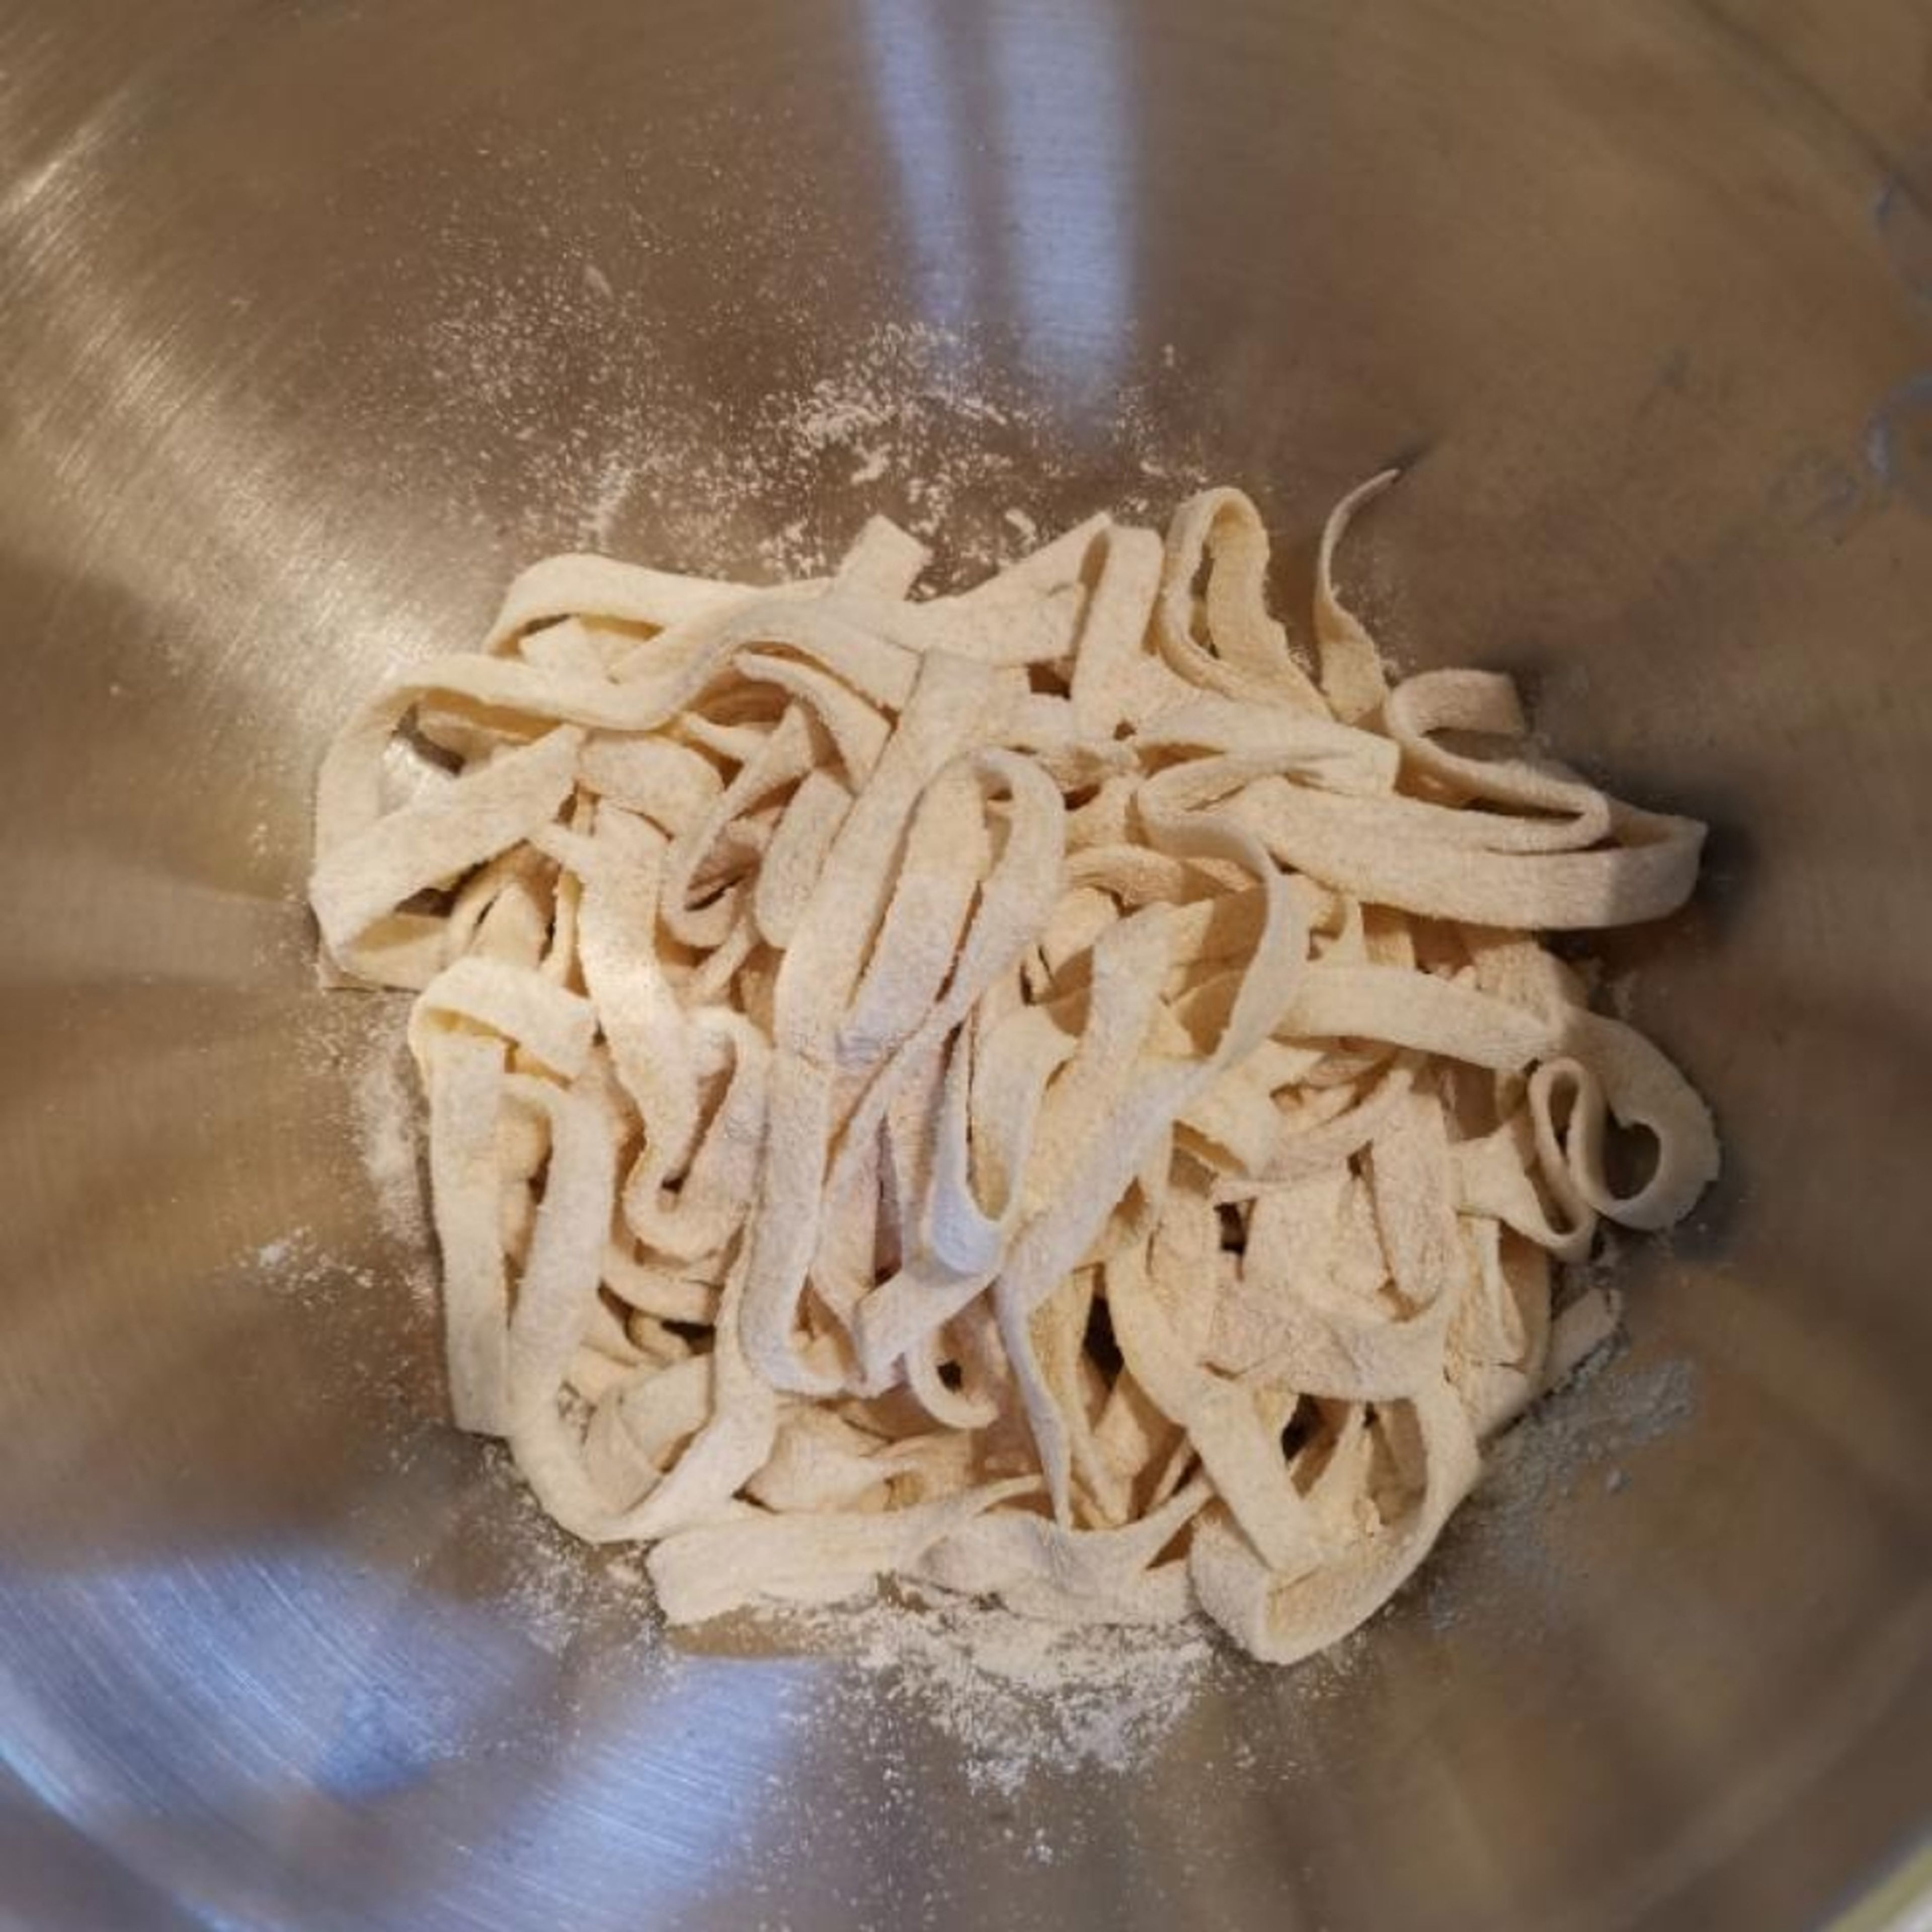 cook the tagliatelli in boiling water with a pinch of salt (optional add some olive oil) for about 3-5 minutes until al dente